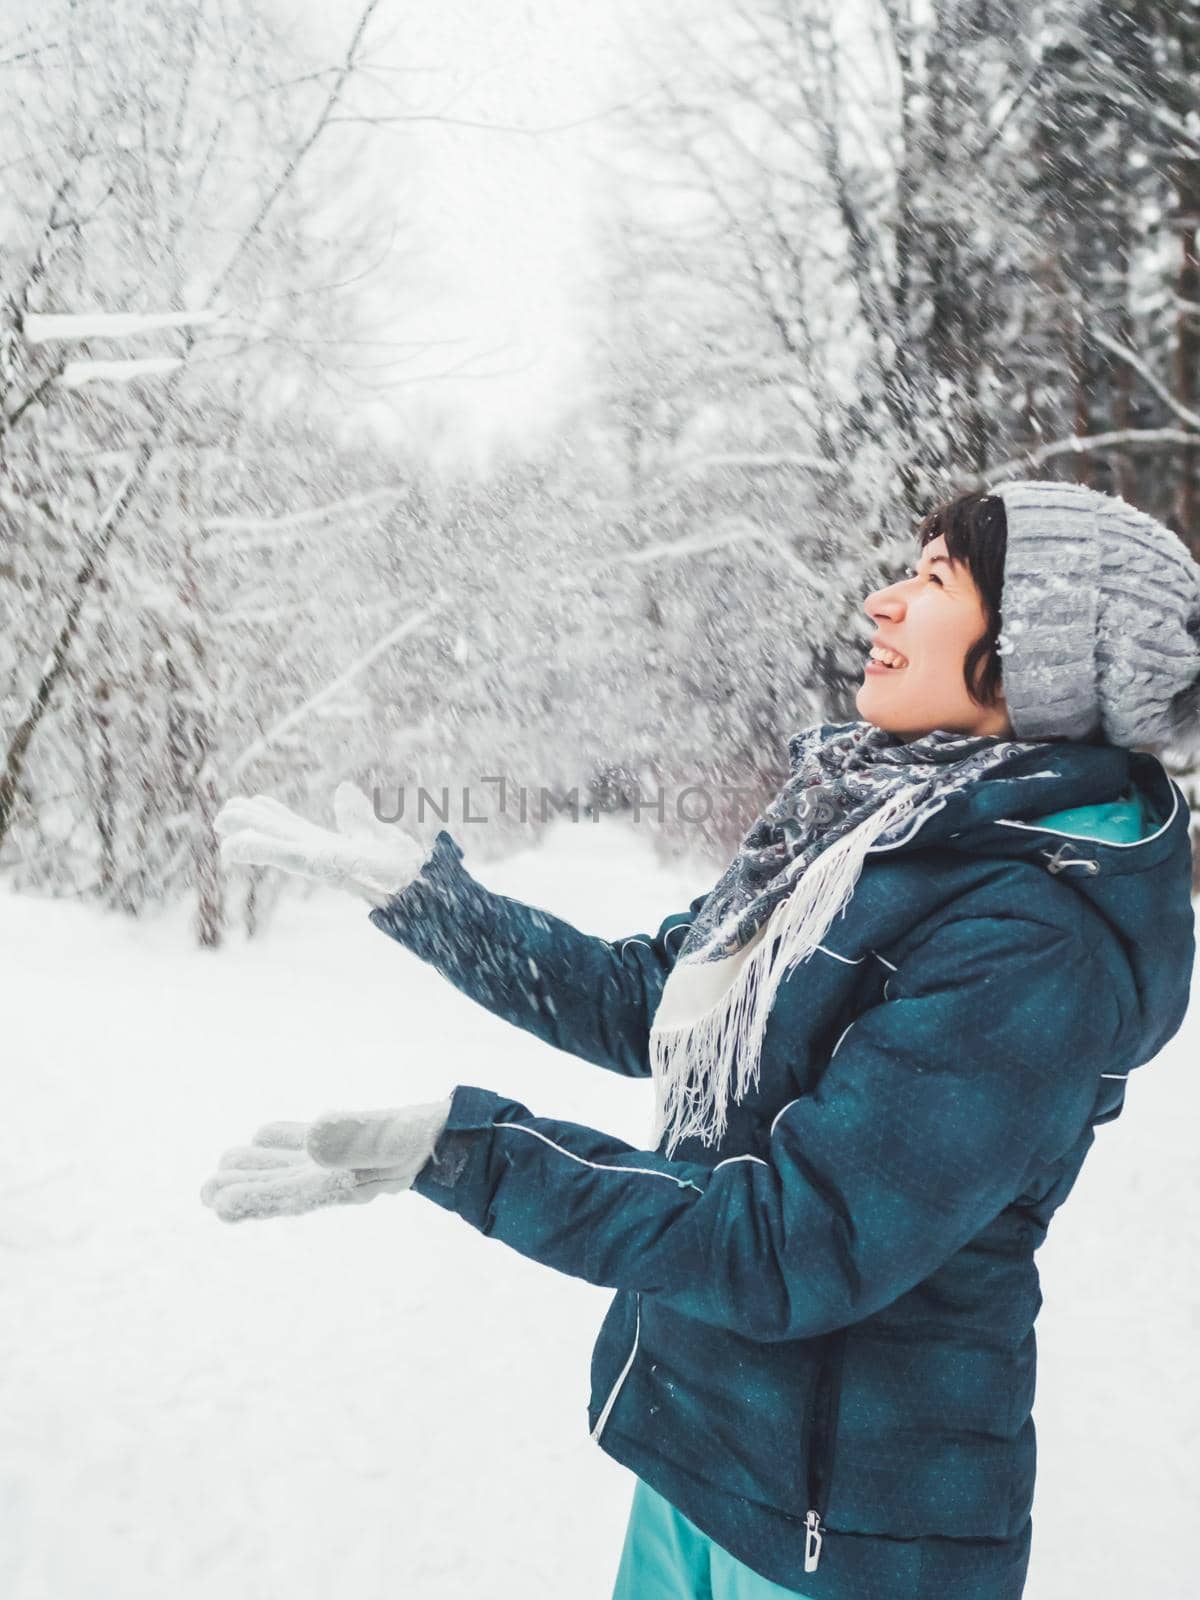 Smiling woman is playing with snow. Fun in snowy winter forest. Woman laughs as she walks through wood. Sincere emotions.